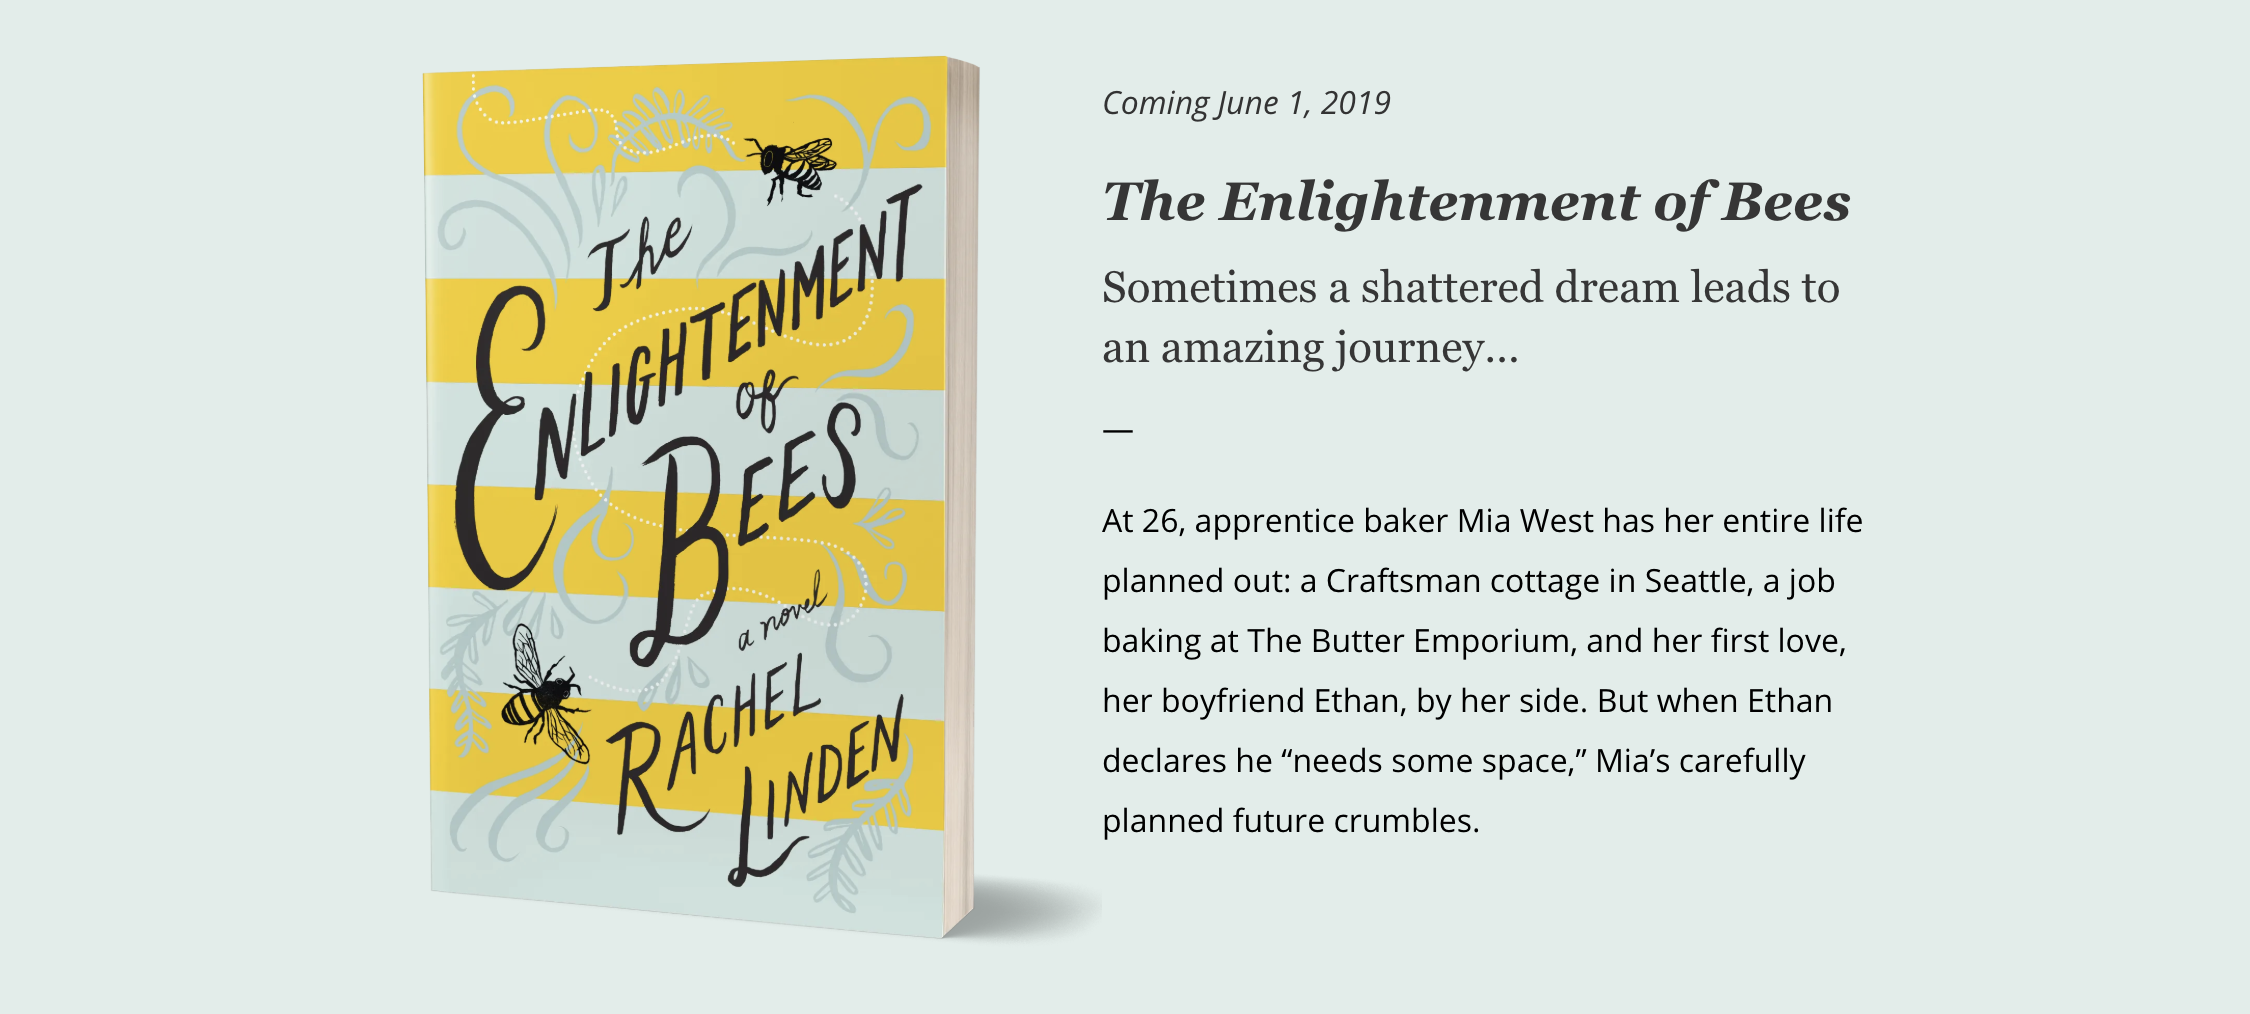 Enlightenment of Bees Promo